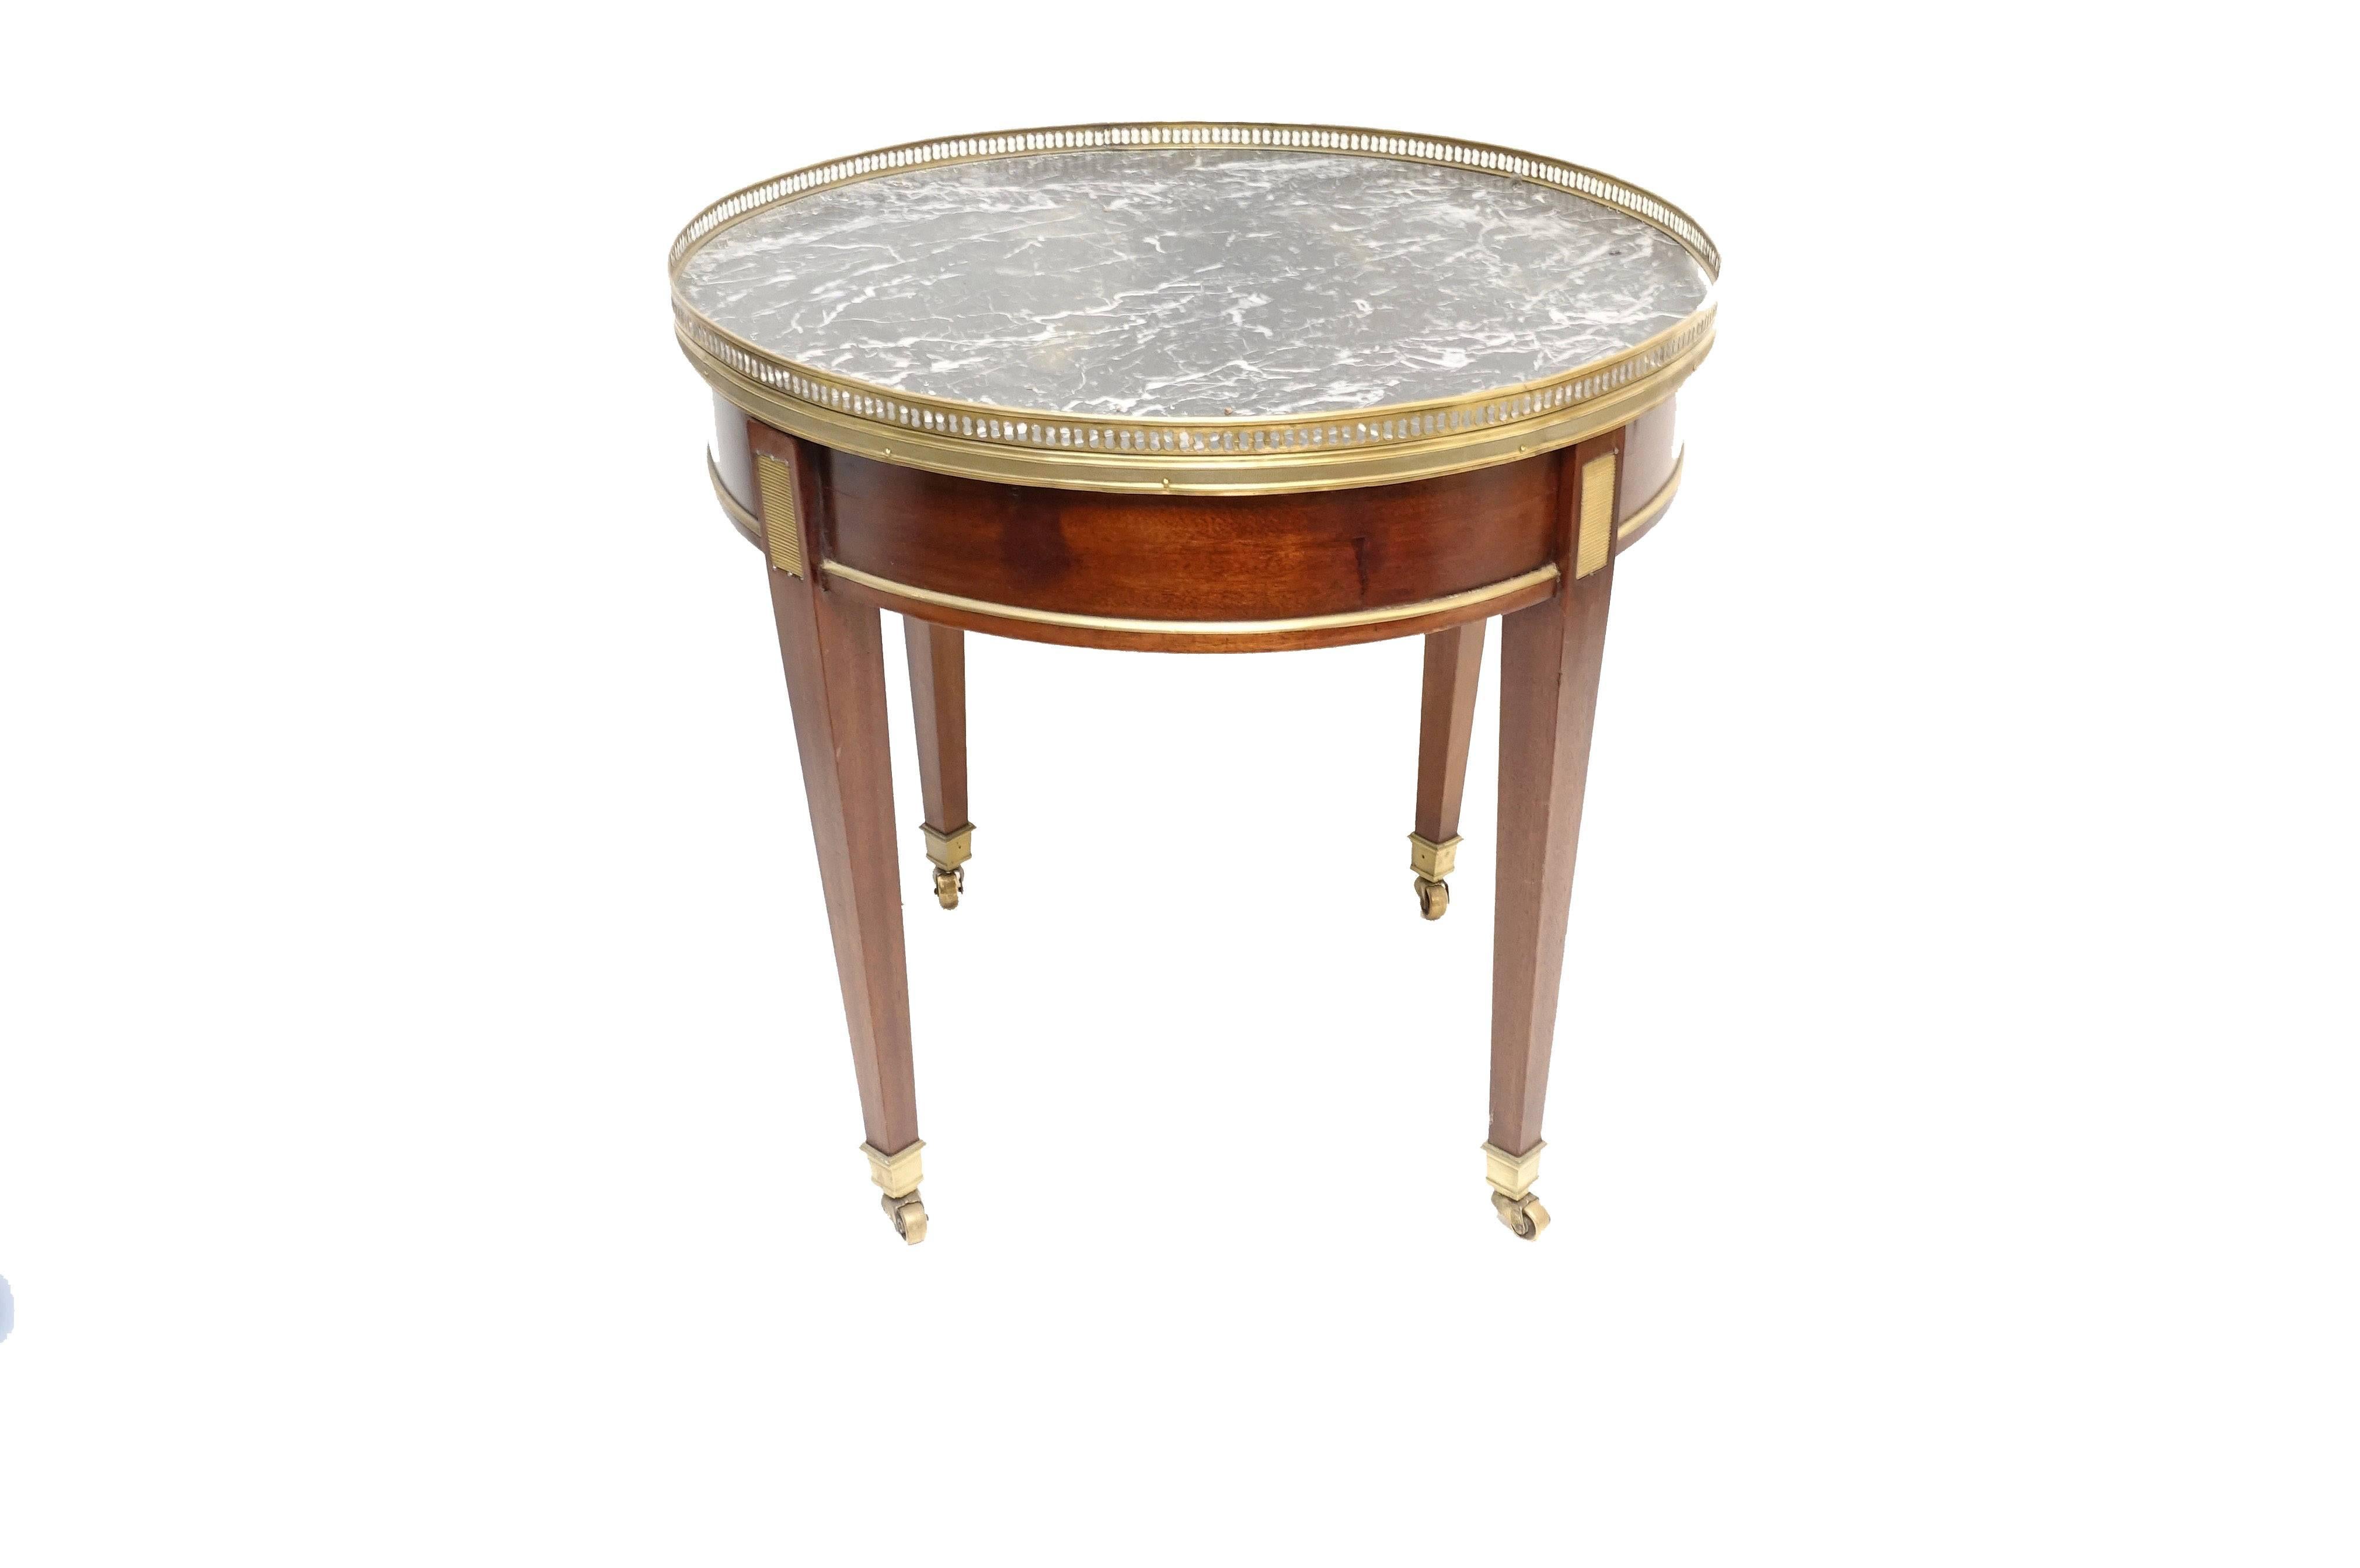 Louis XVI style mahogany bouillotte table with veined gray and white marble top. Having a brass gallery and moldings, with ribbed brass fillet inlay and tapering legs ending in brass sabots with casters. France, circa 1870.